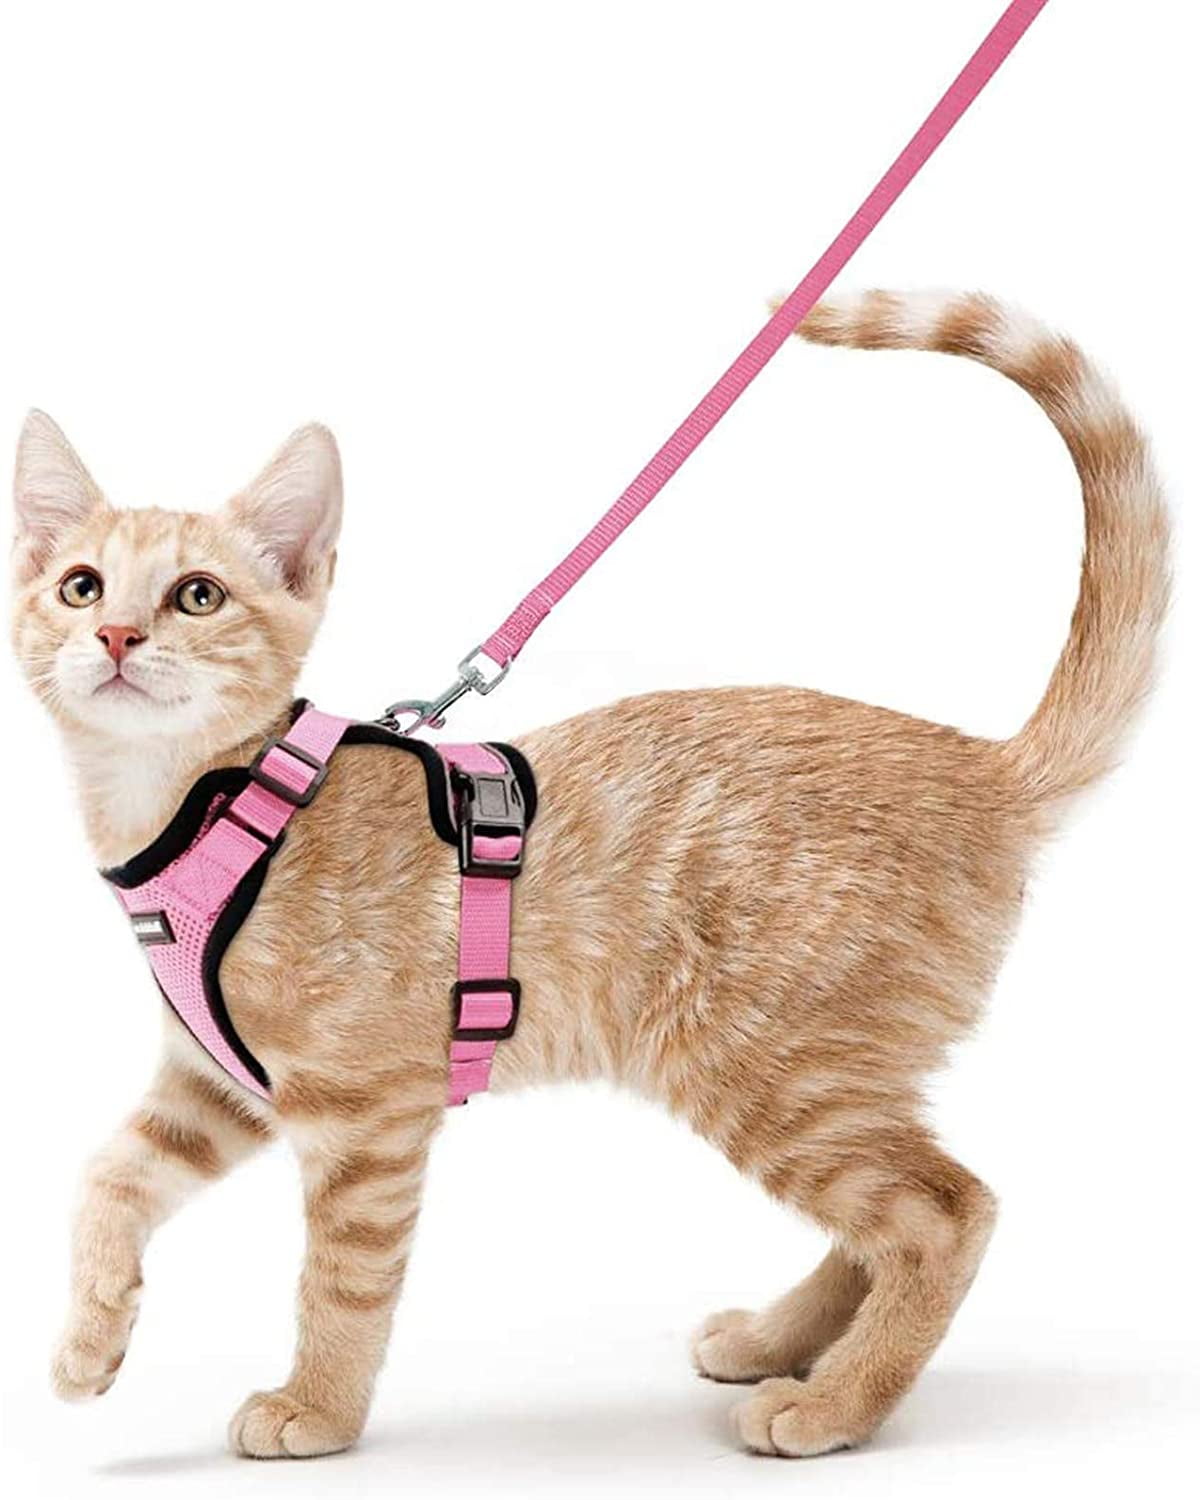 rabbitgoo Cat Harness and Leash for Walking, Escape Proof Soft Adjustable Vest  Harnesses for Cats, Easy Control Breathable Reflective Strips Jacket,  Yellow